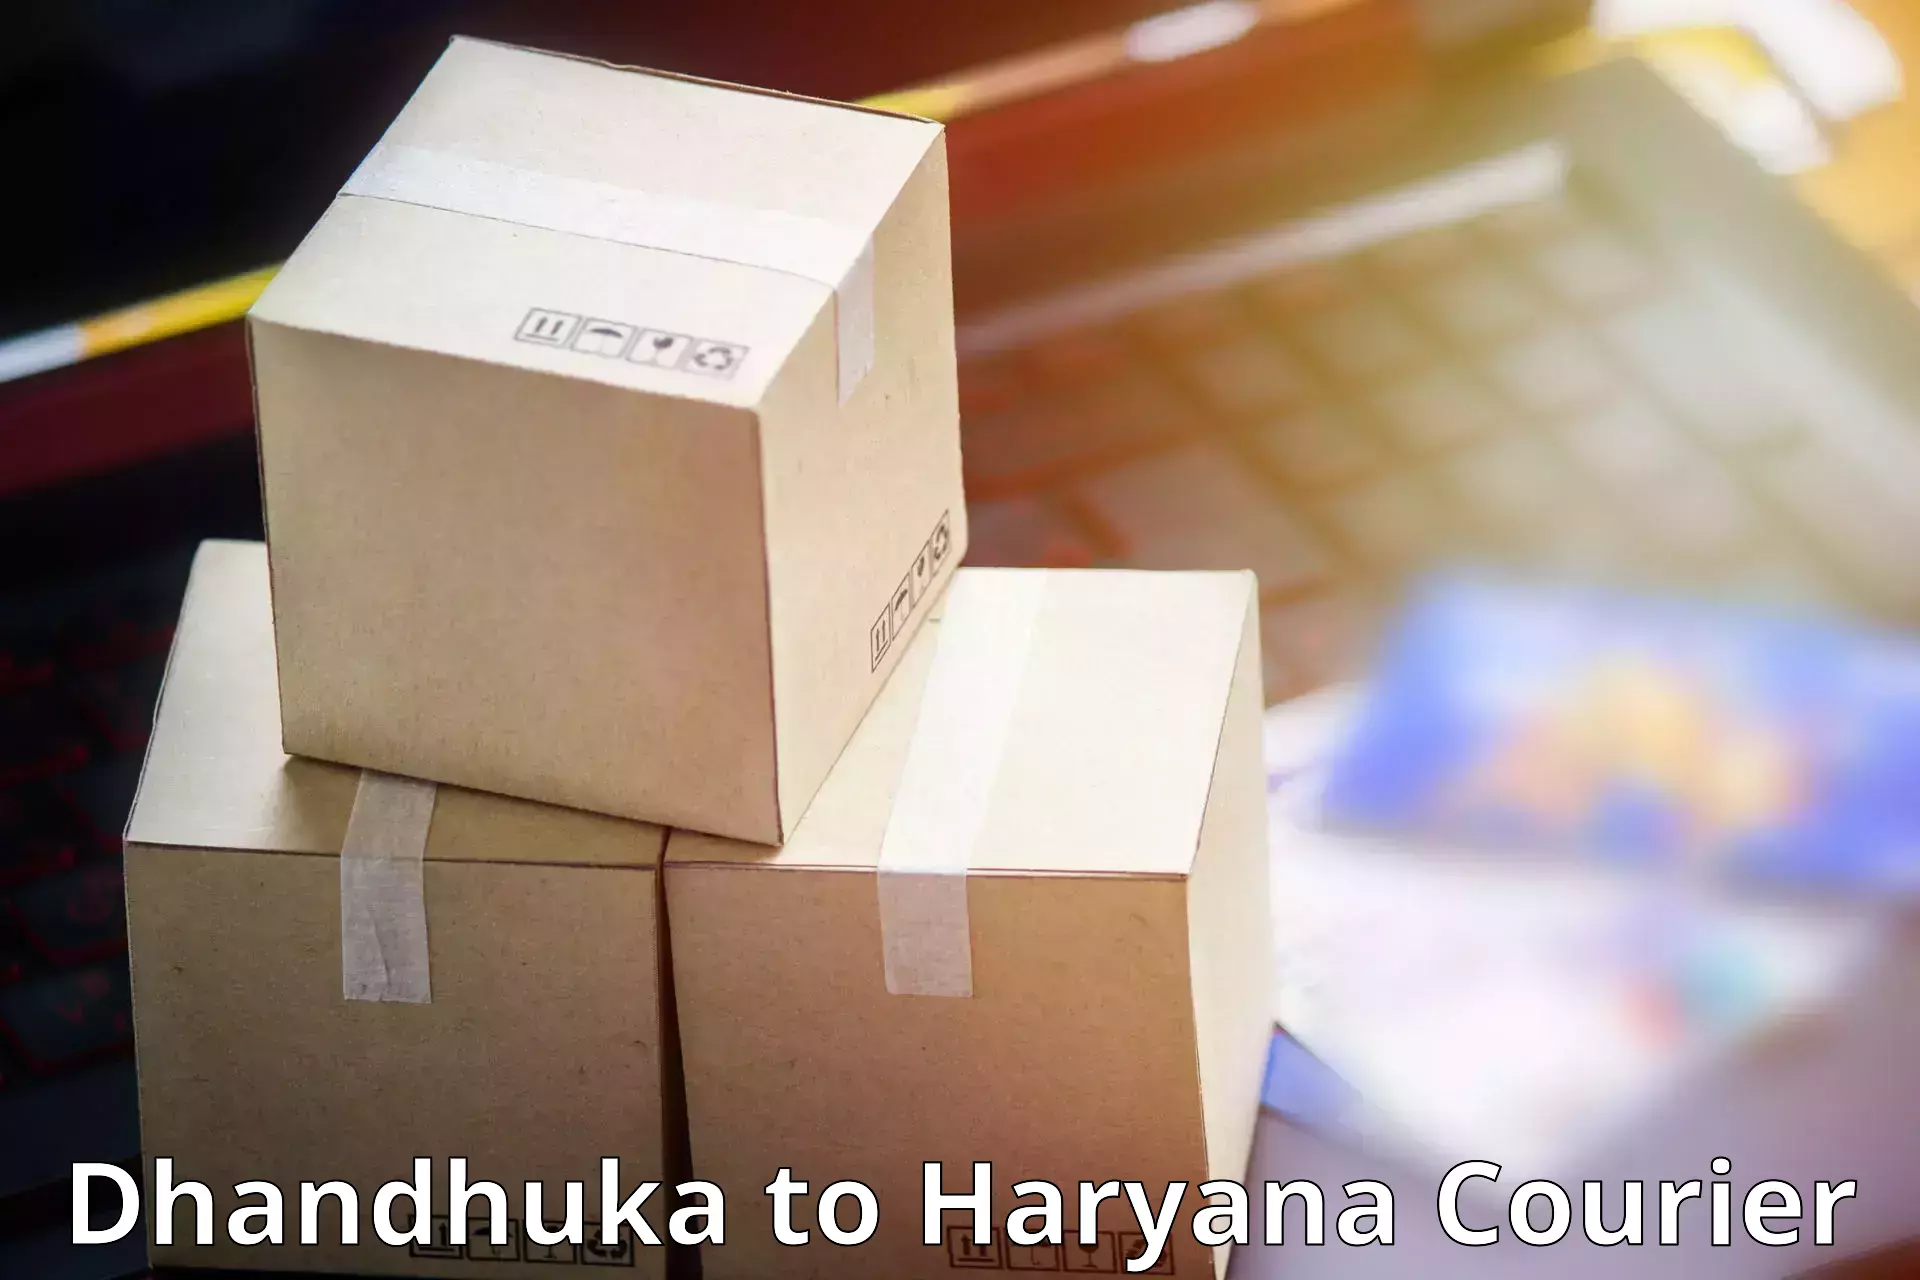 Courier services Dhandhuka to Faridabad